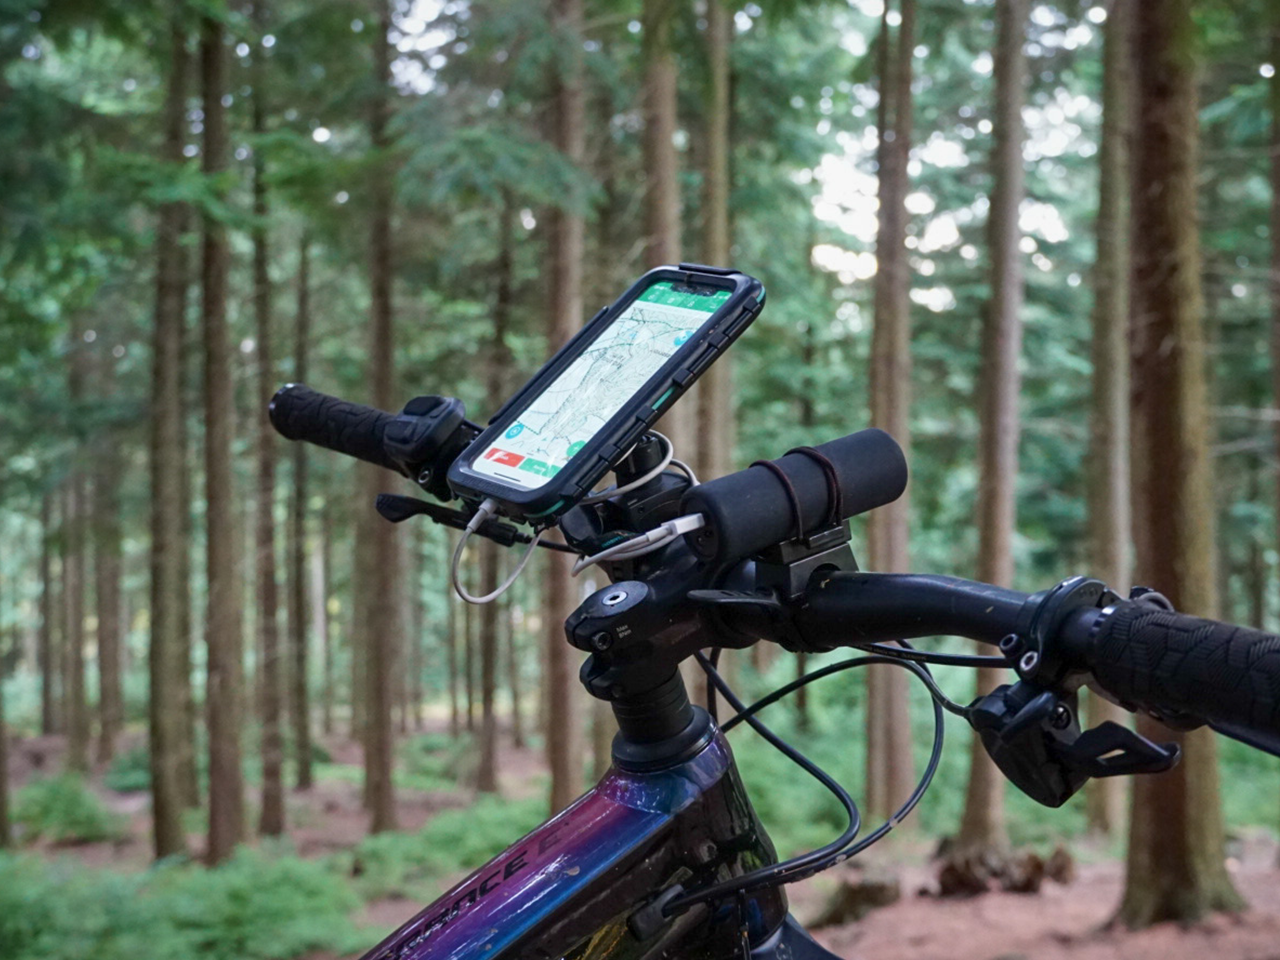 Durable Bike Mount Attachments with Tough Case for All Samsung Galaxy's